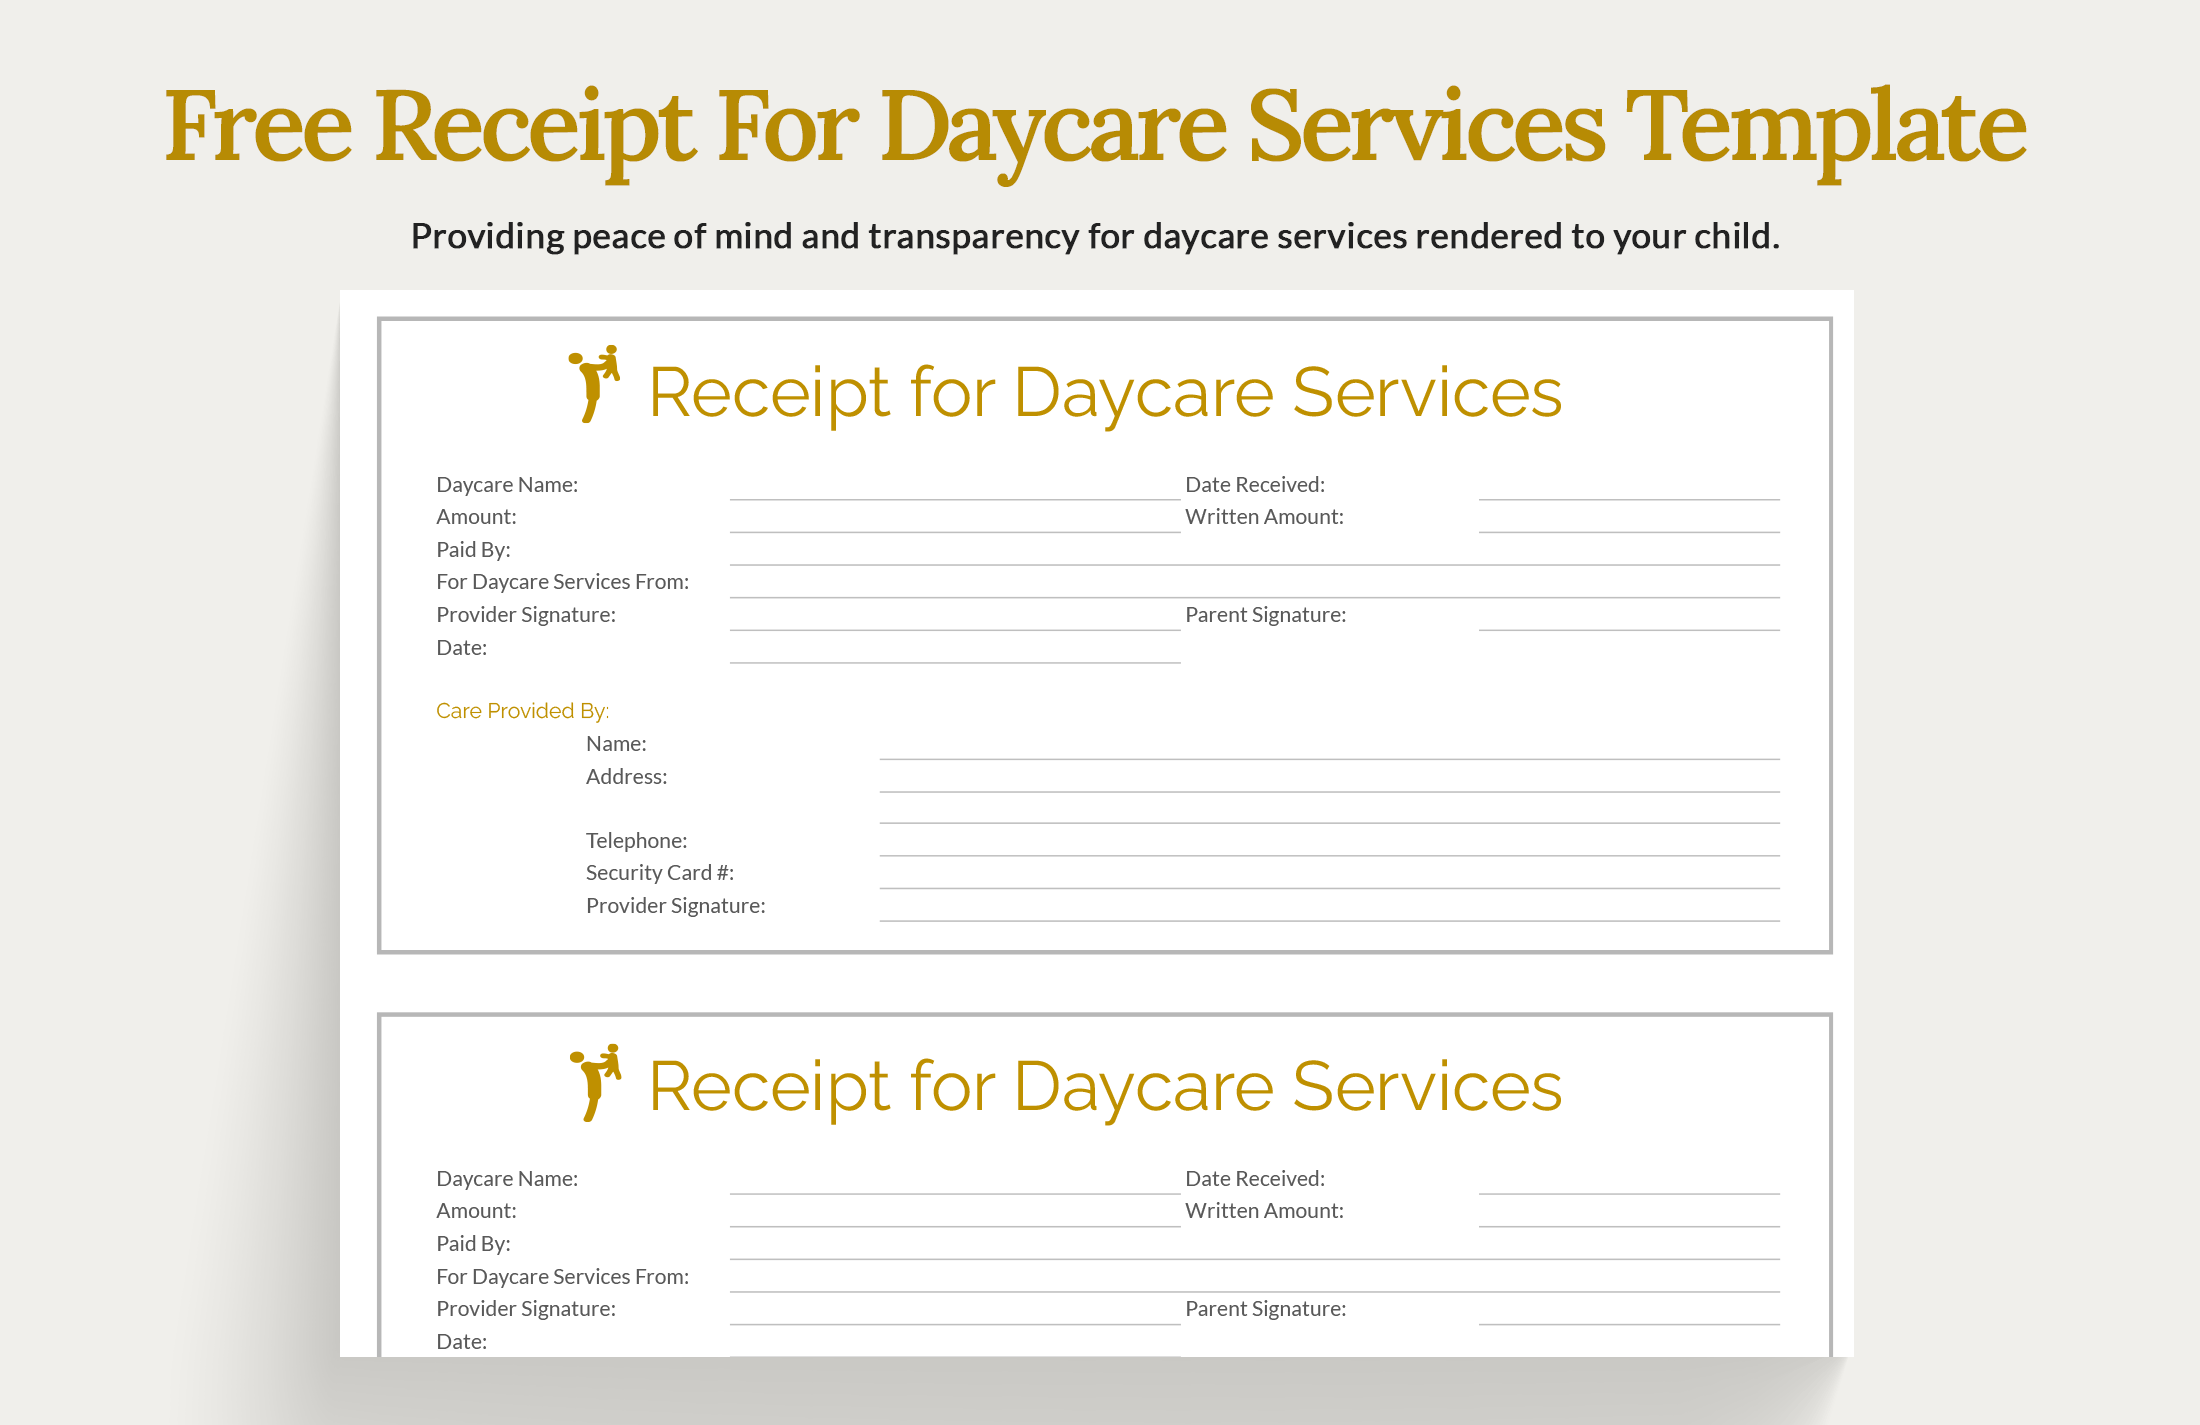 free-receipt-for-daycare-services-template-google-docs-google-sheets-excel-word-apple